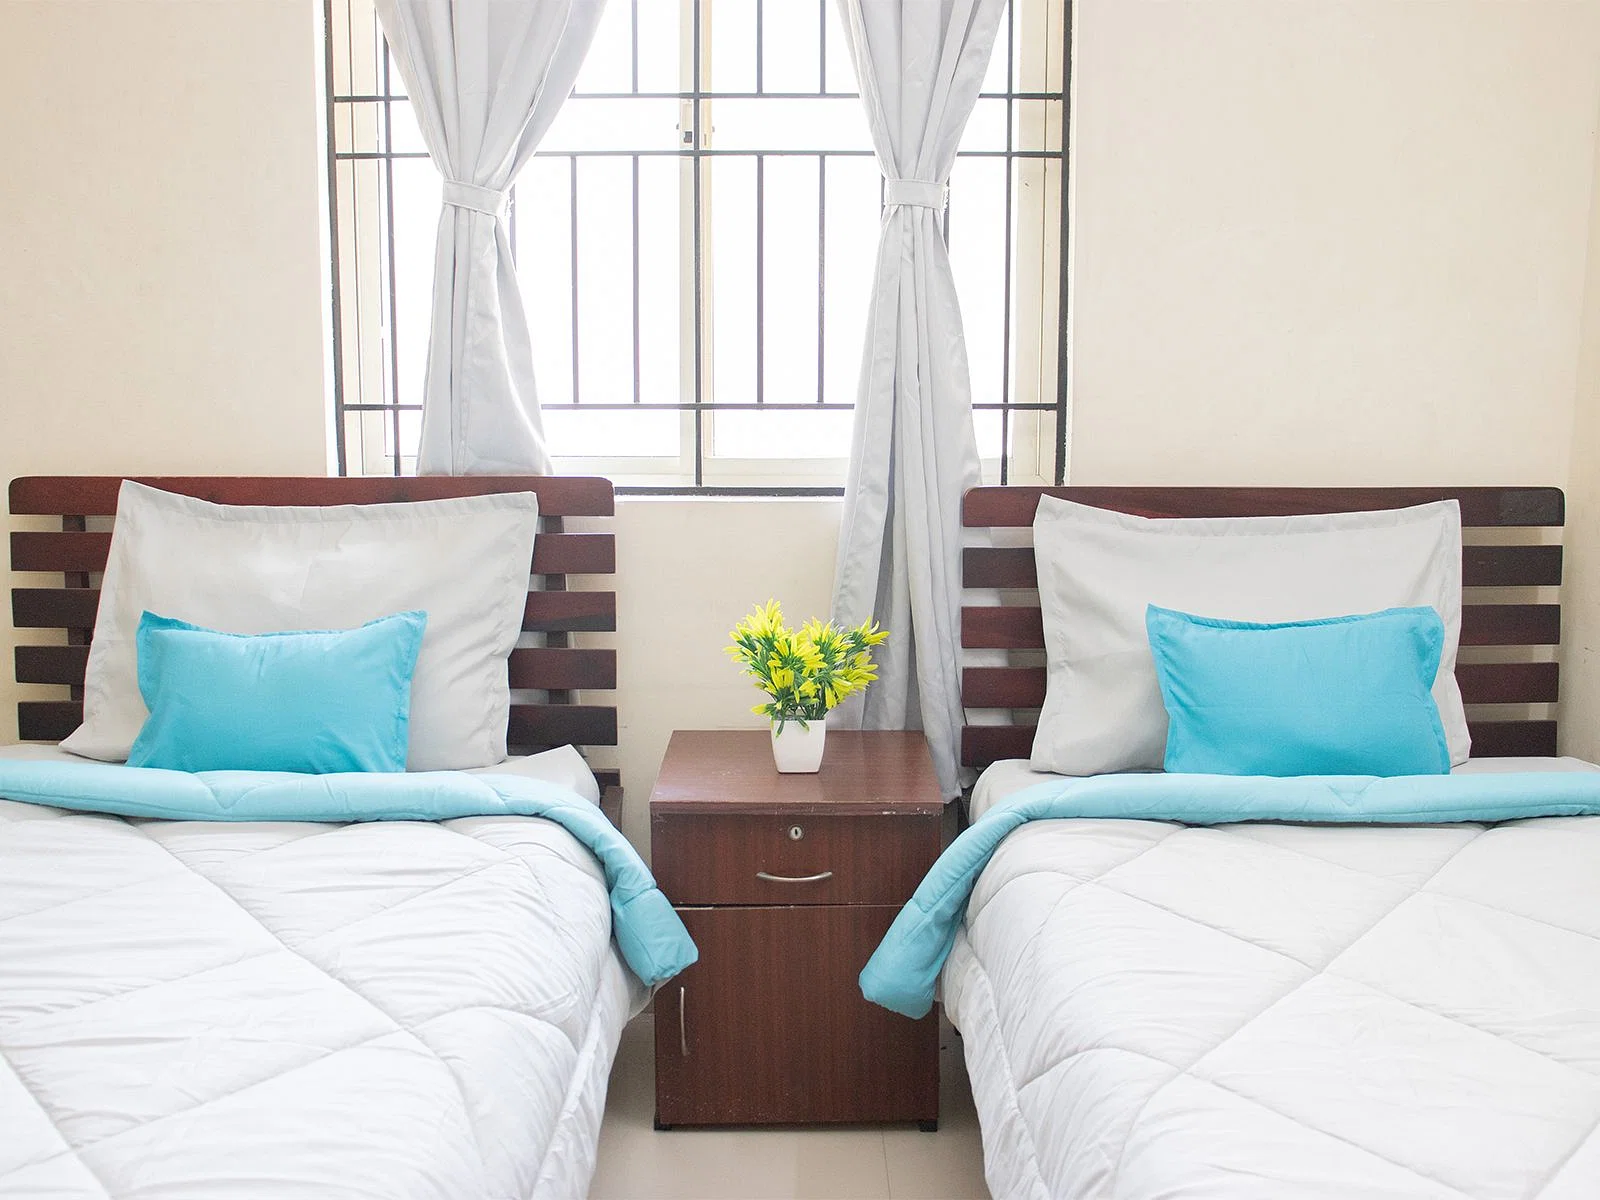 pgs in Bellandur with Daily housekeeping facilities and free Wi-Fi-Zolo Nirvana